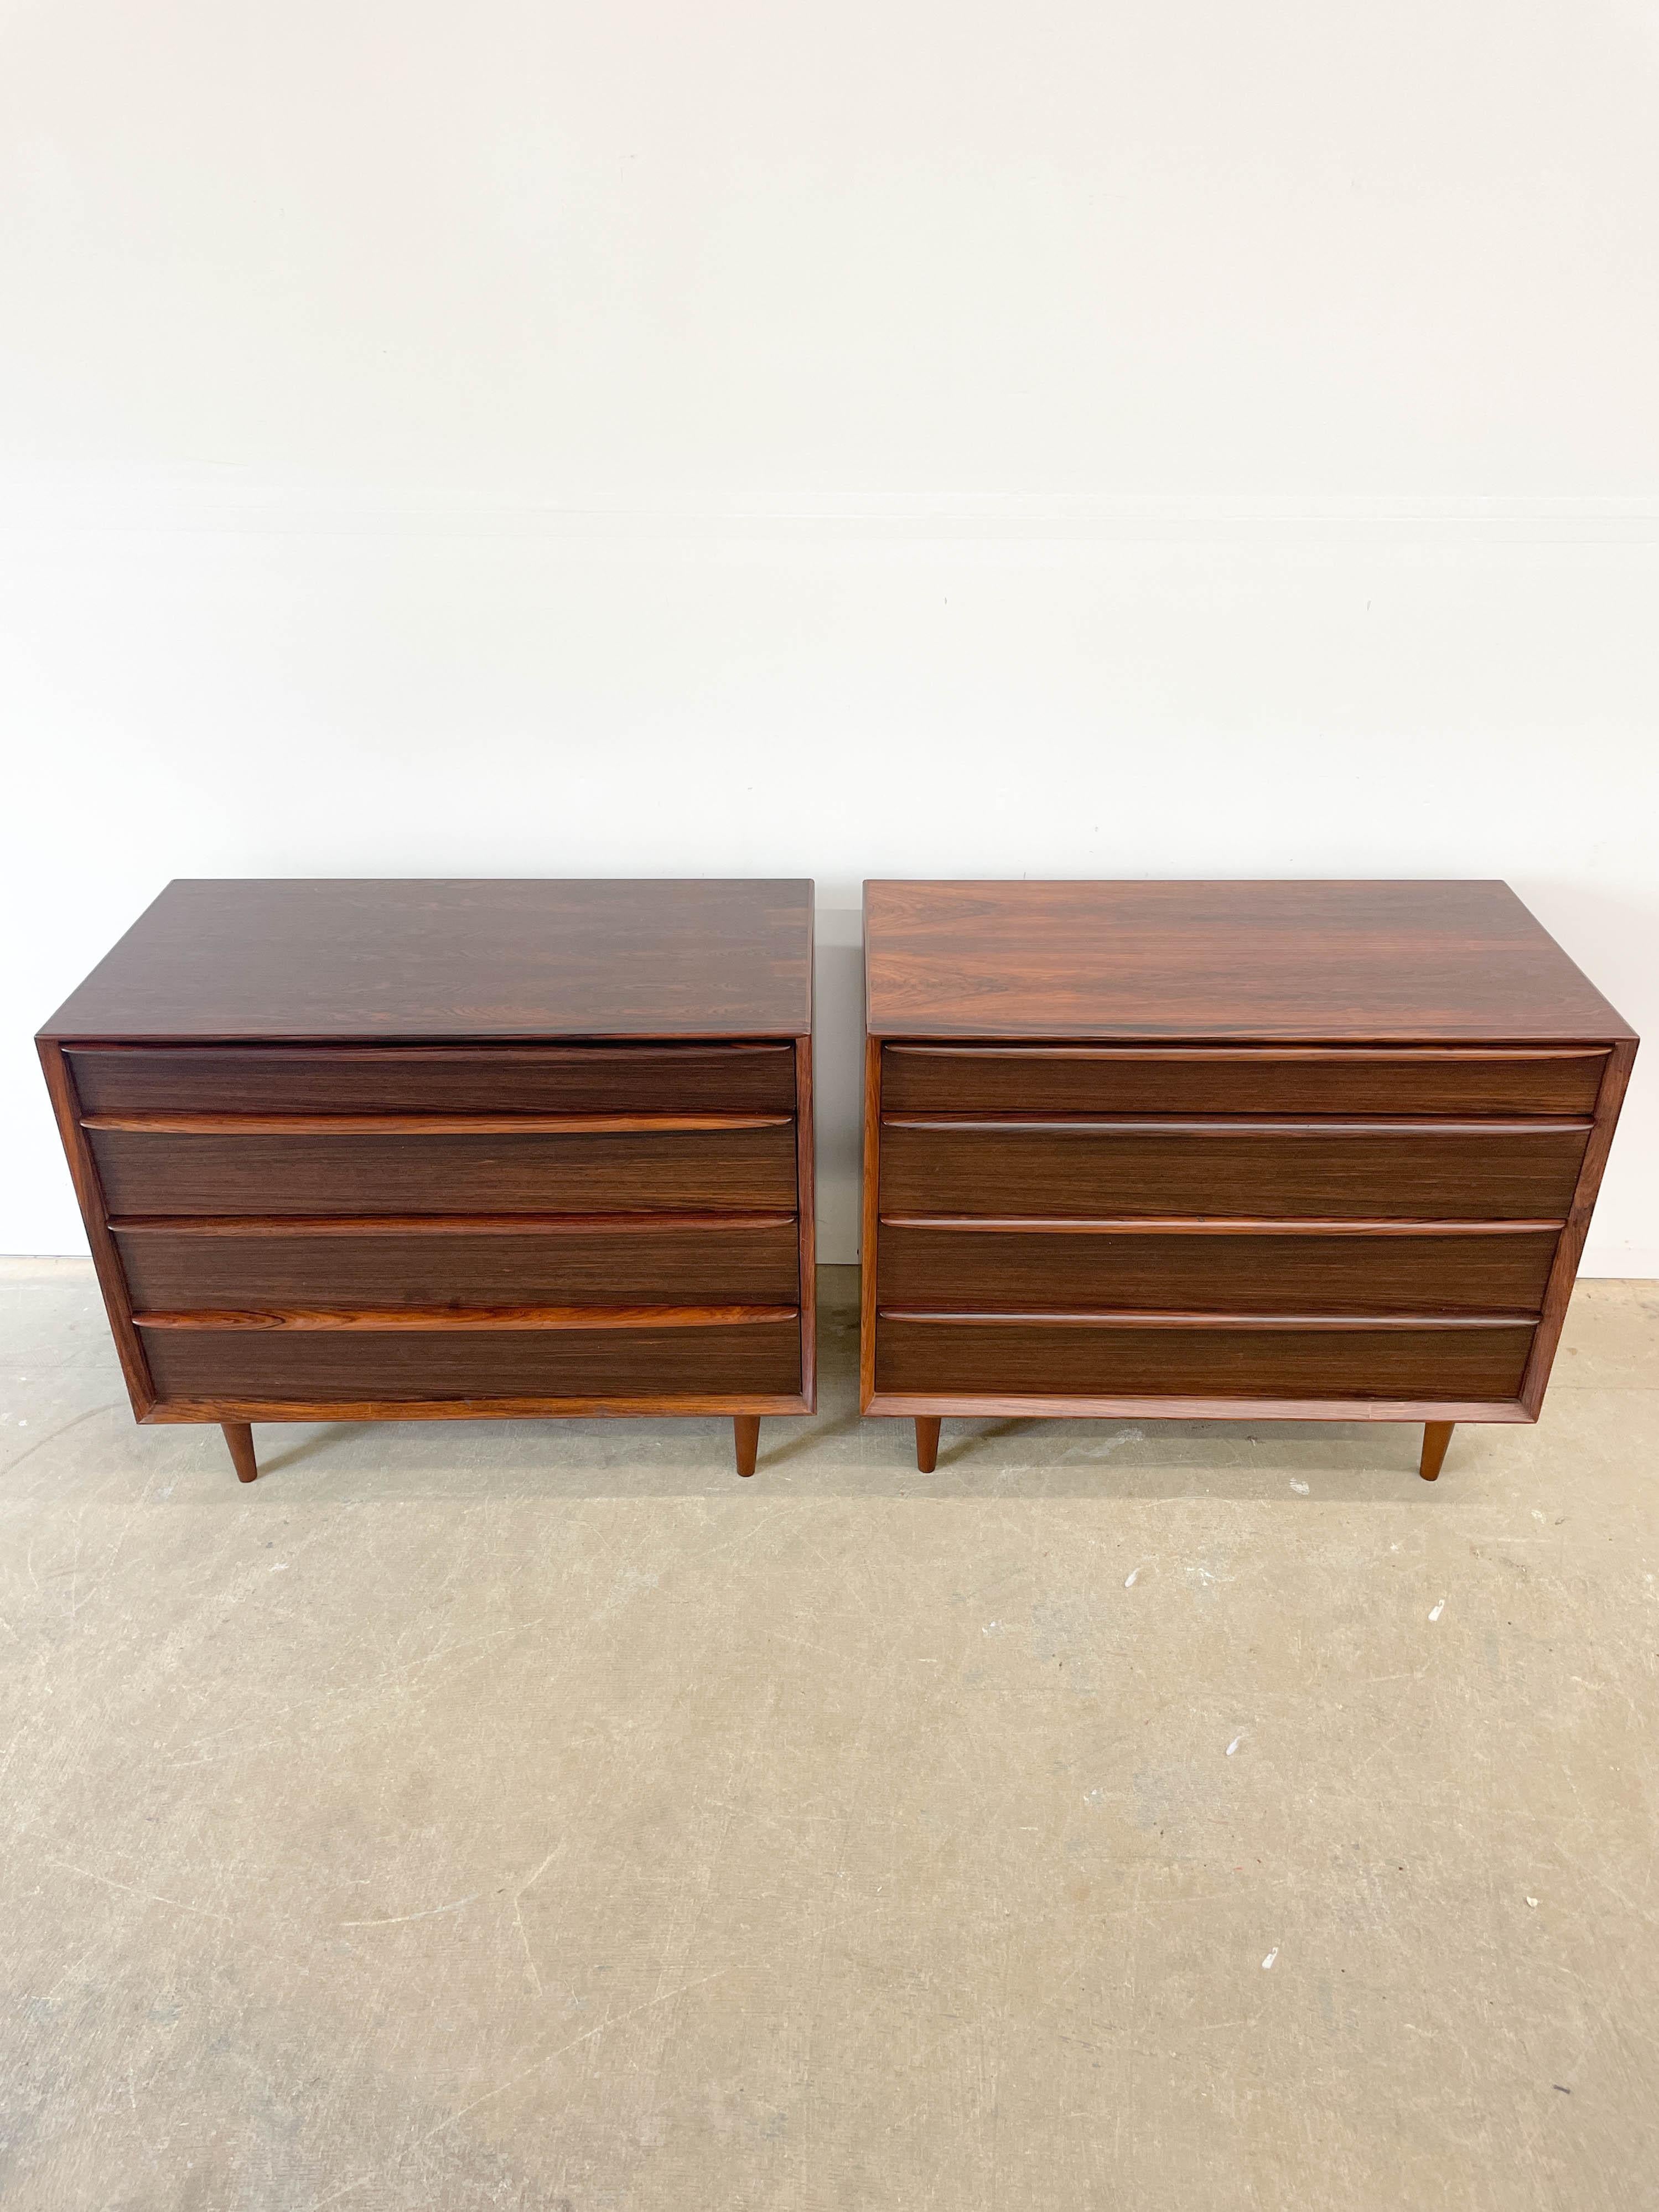 Stunning Brazilian Rosewood dressers made by Falster in Denmark in the 1960s. Beautiful woodgrain on all visible  faces and sculpted drawer pulls make these true show stoppers. Excellent storage and style to boot. Very good original condition. Both